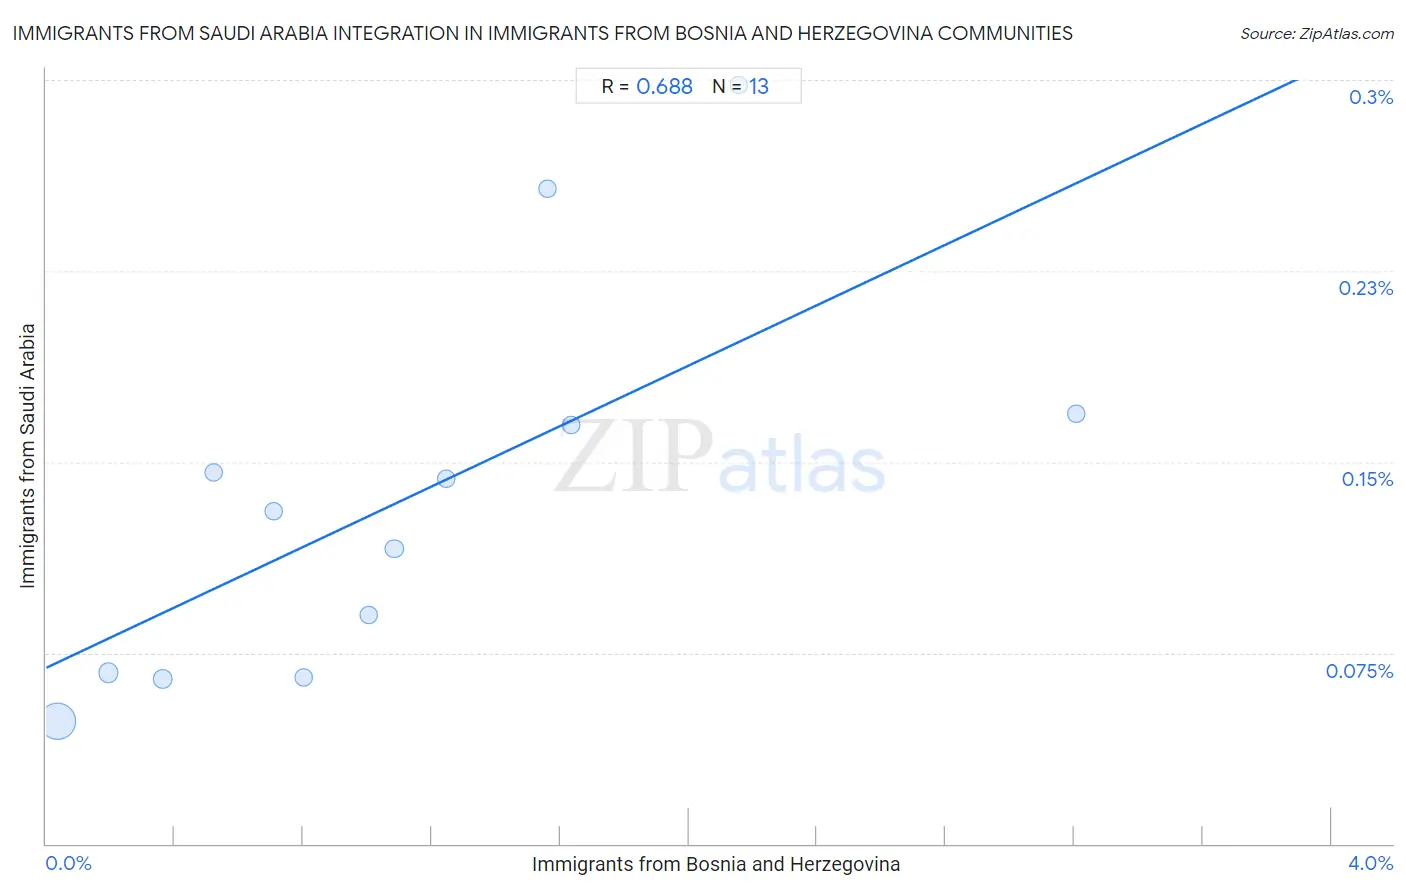 Immigrants from Bosnia and Herzegovina Integration in Immigrants from Saudi Arabia Communities